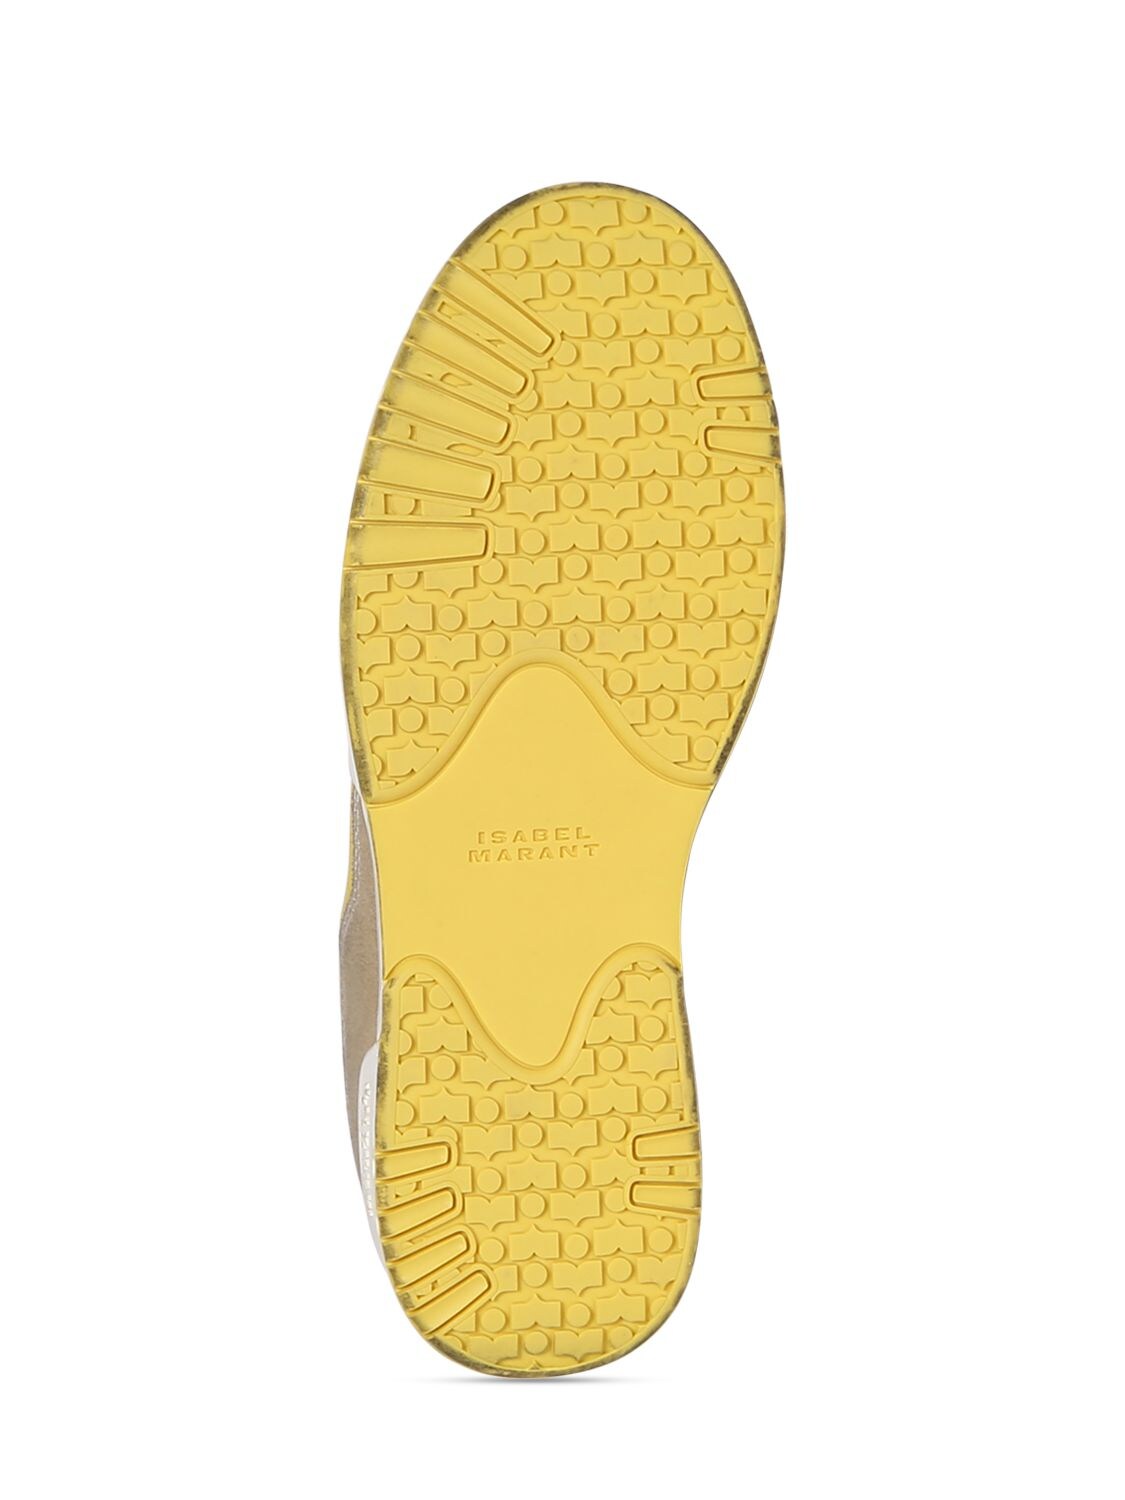 Shop Isabel Marant Emree Leather Sneakers In White,yellow